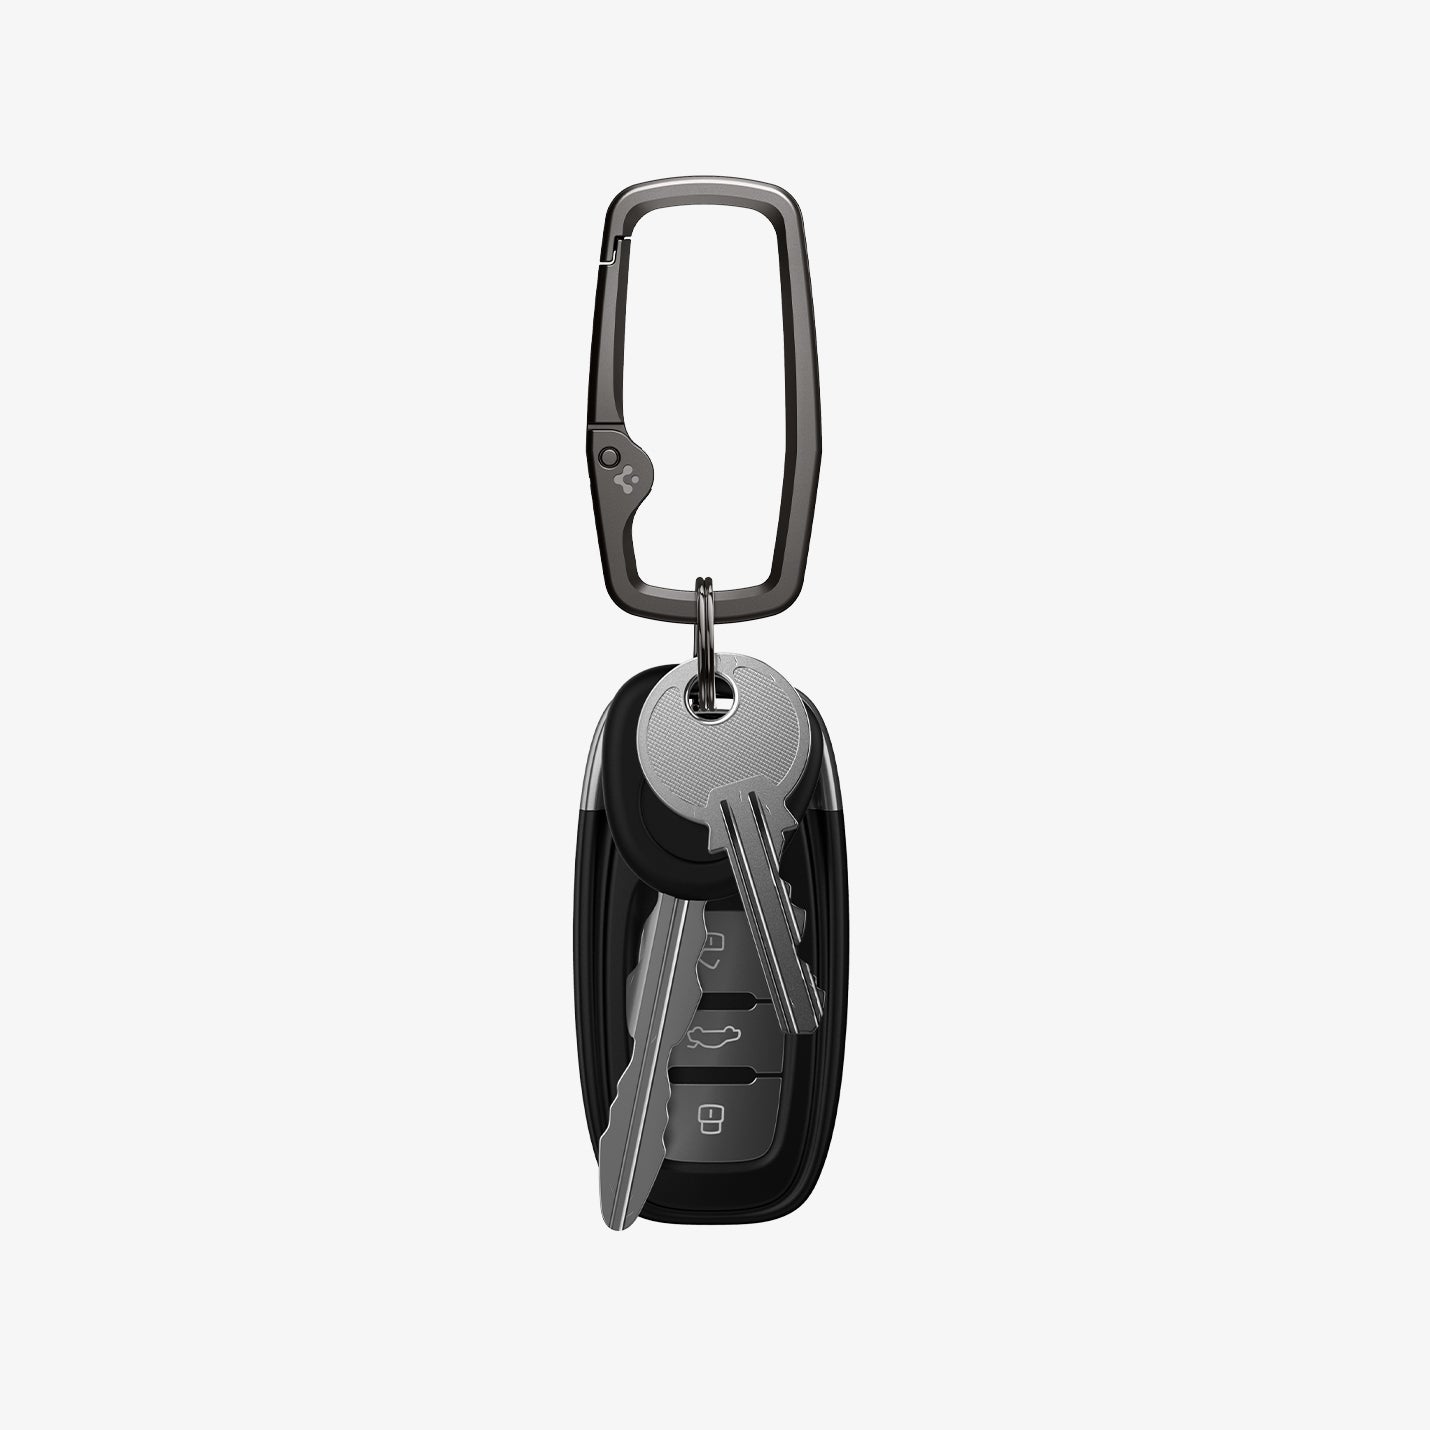 AHP02933 - Carabiner Rugged Type in black showing car keys and keys attached to carabiner